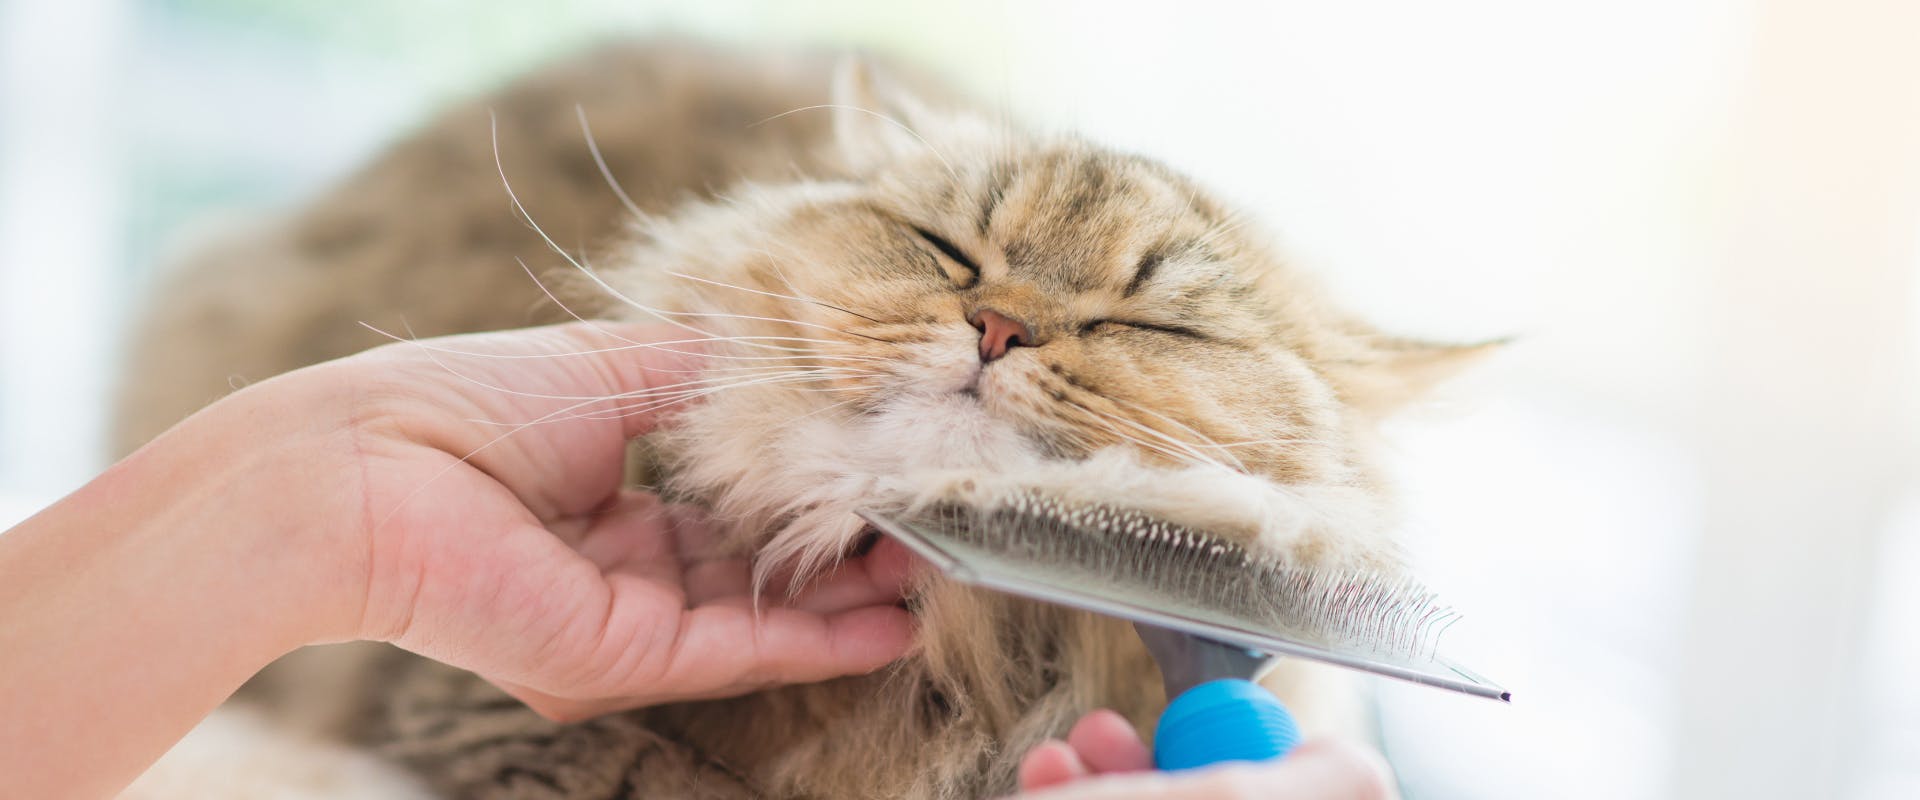 long haired cat being brushed with a cat groomer under its chin